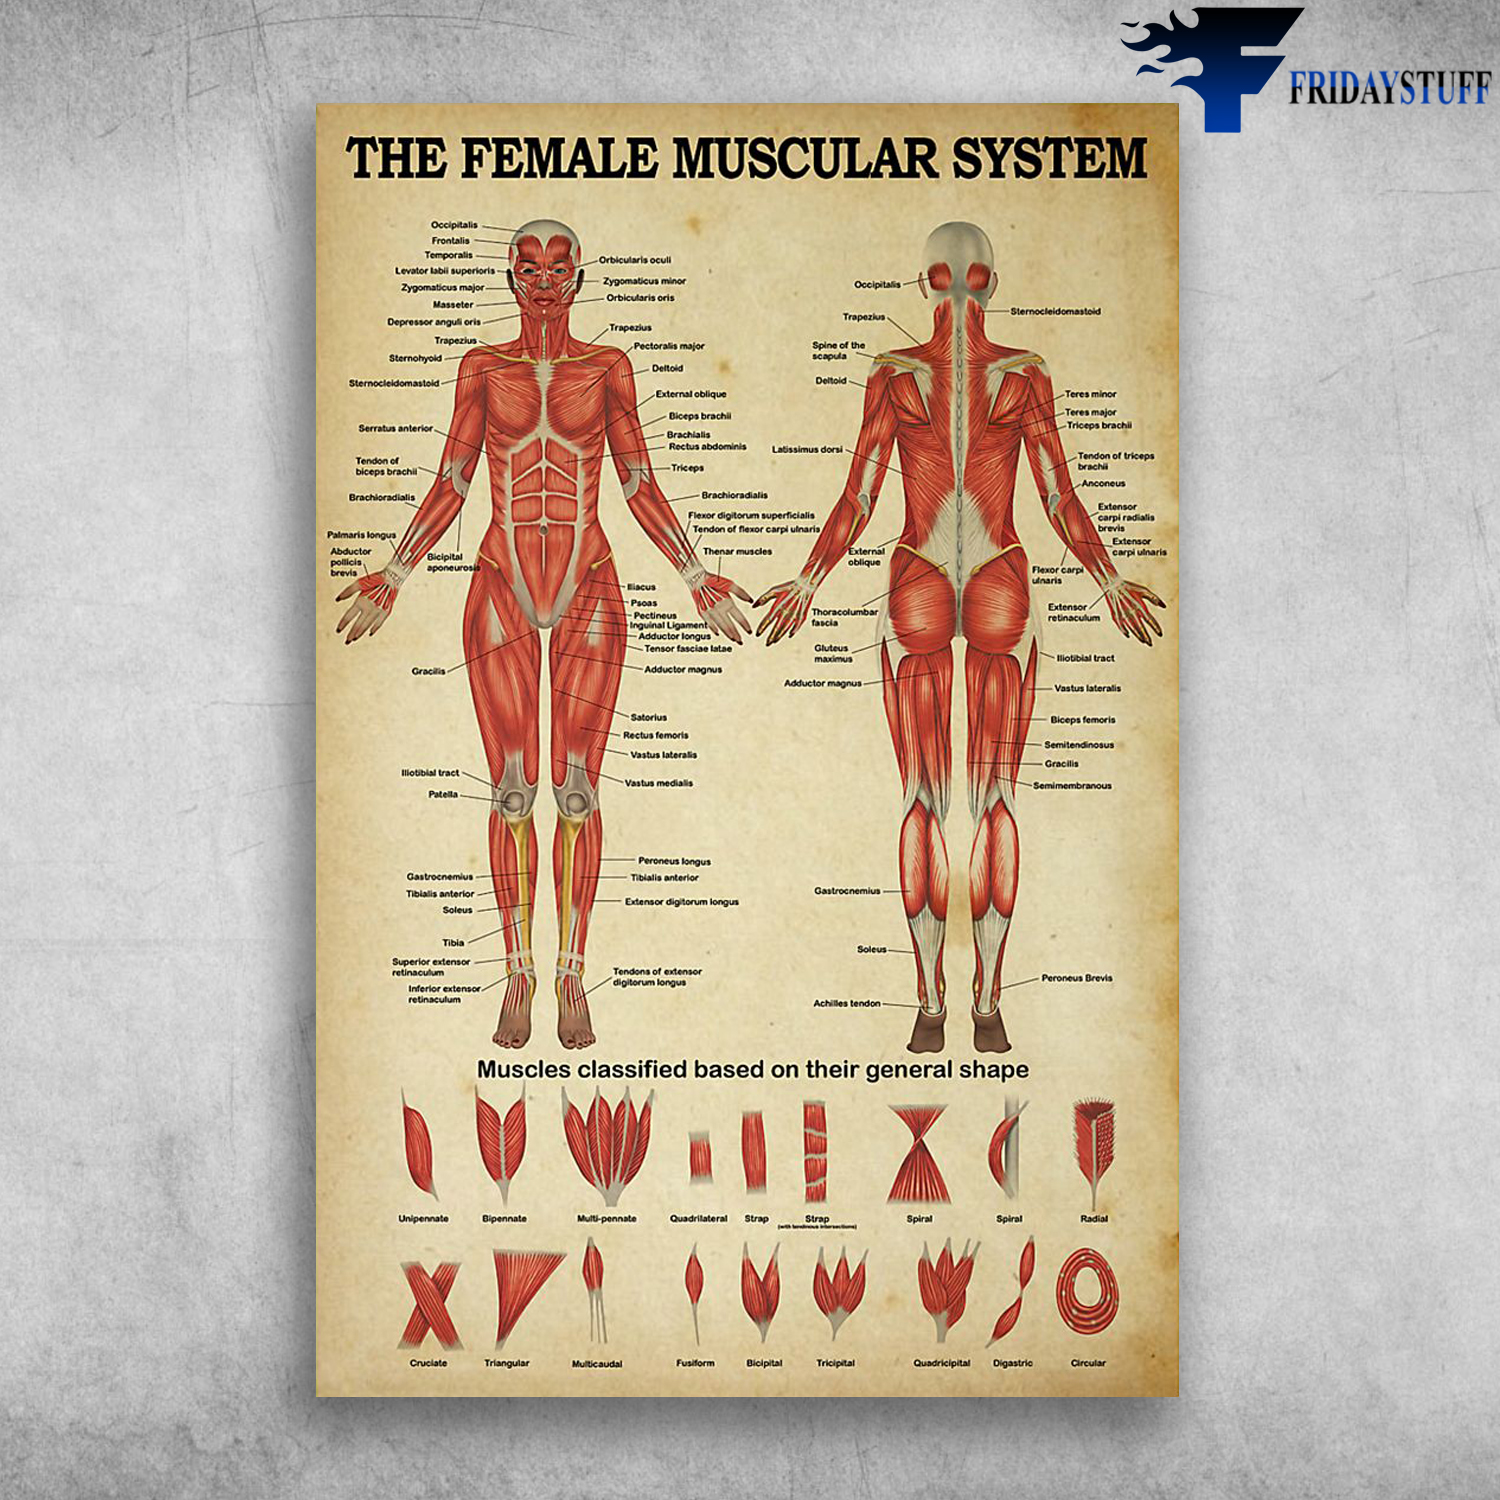 The Female Muscular System Muscles Classified Based On Their General Shape